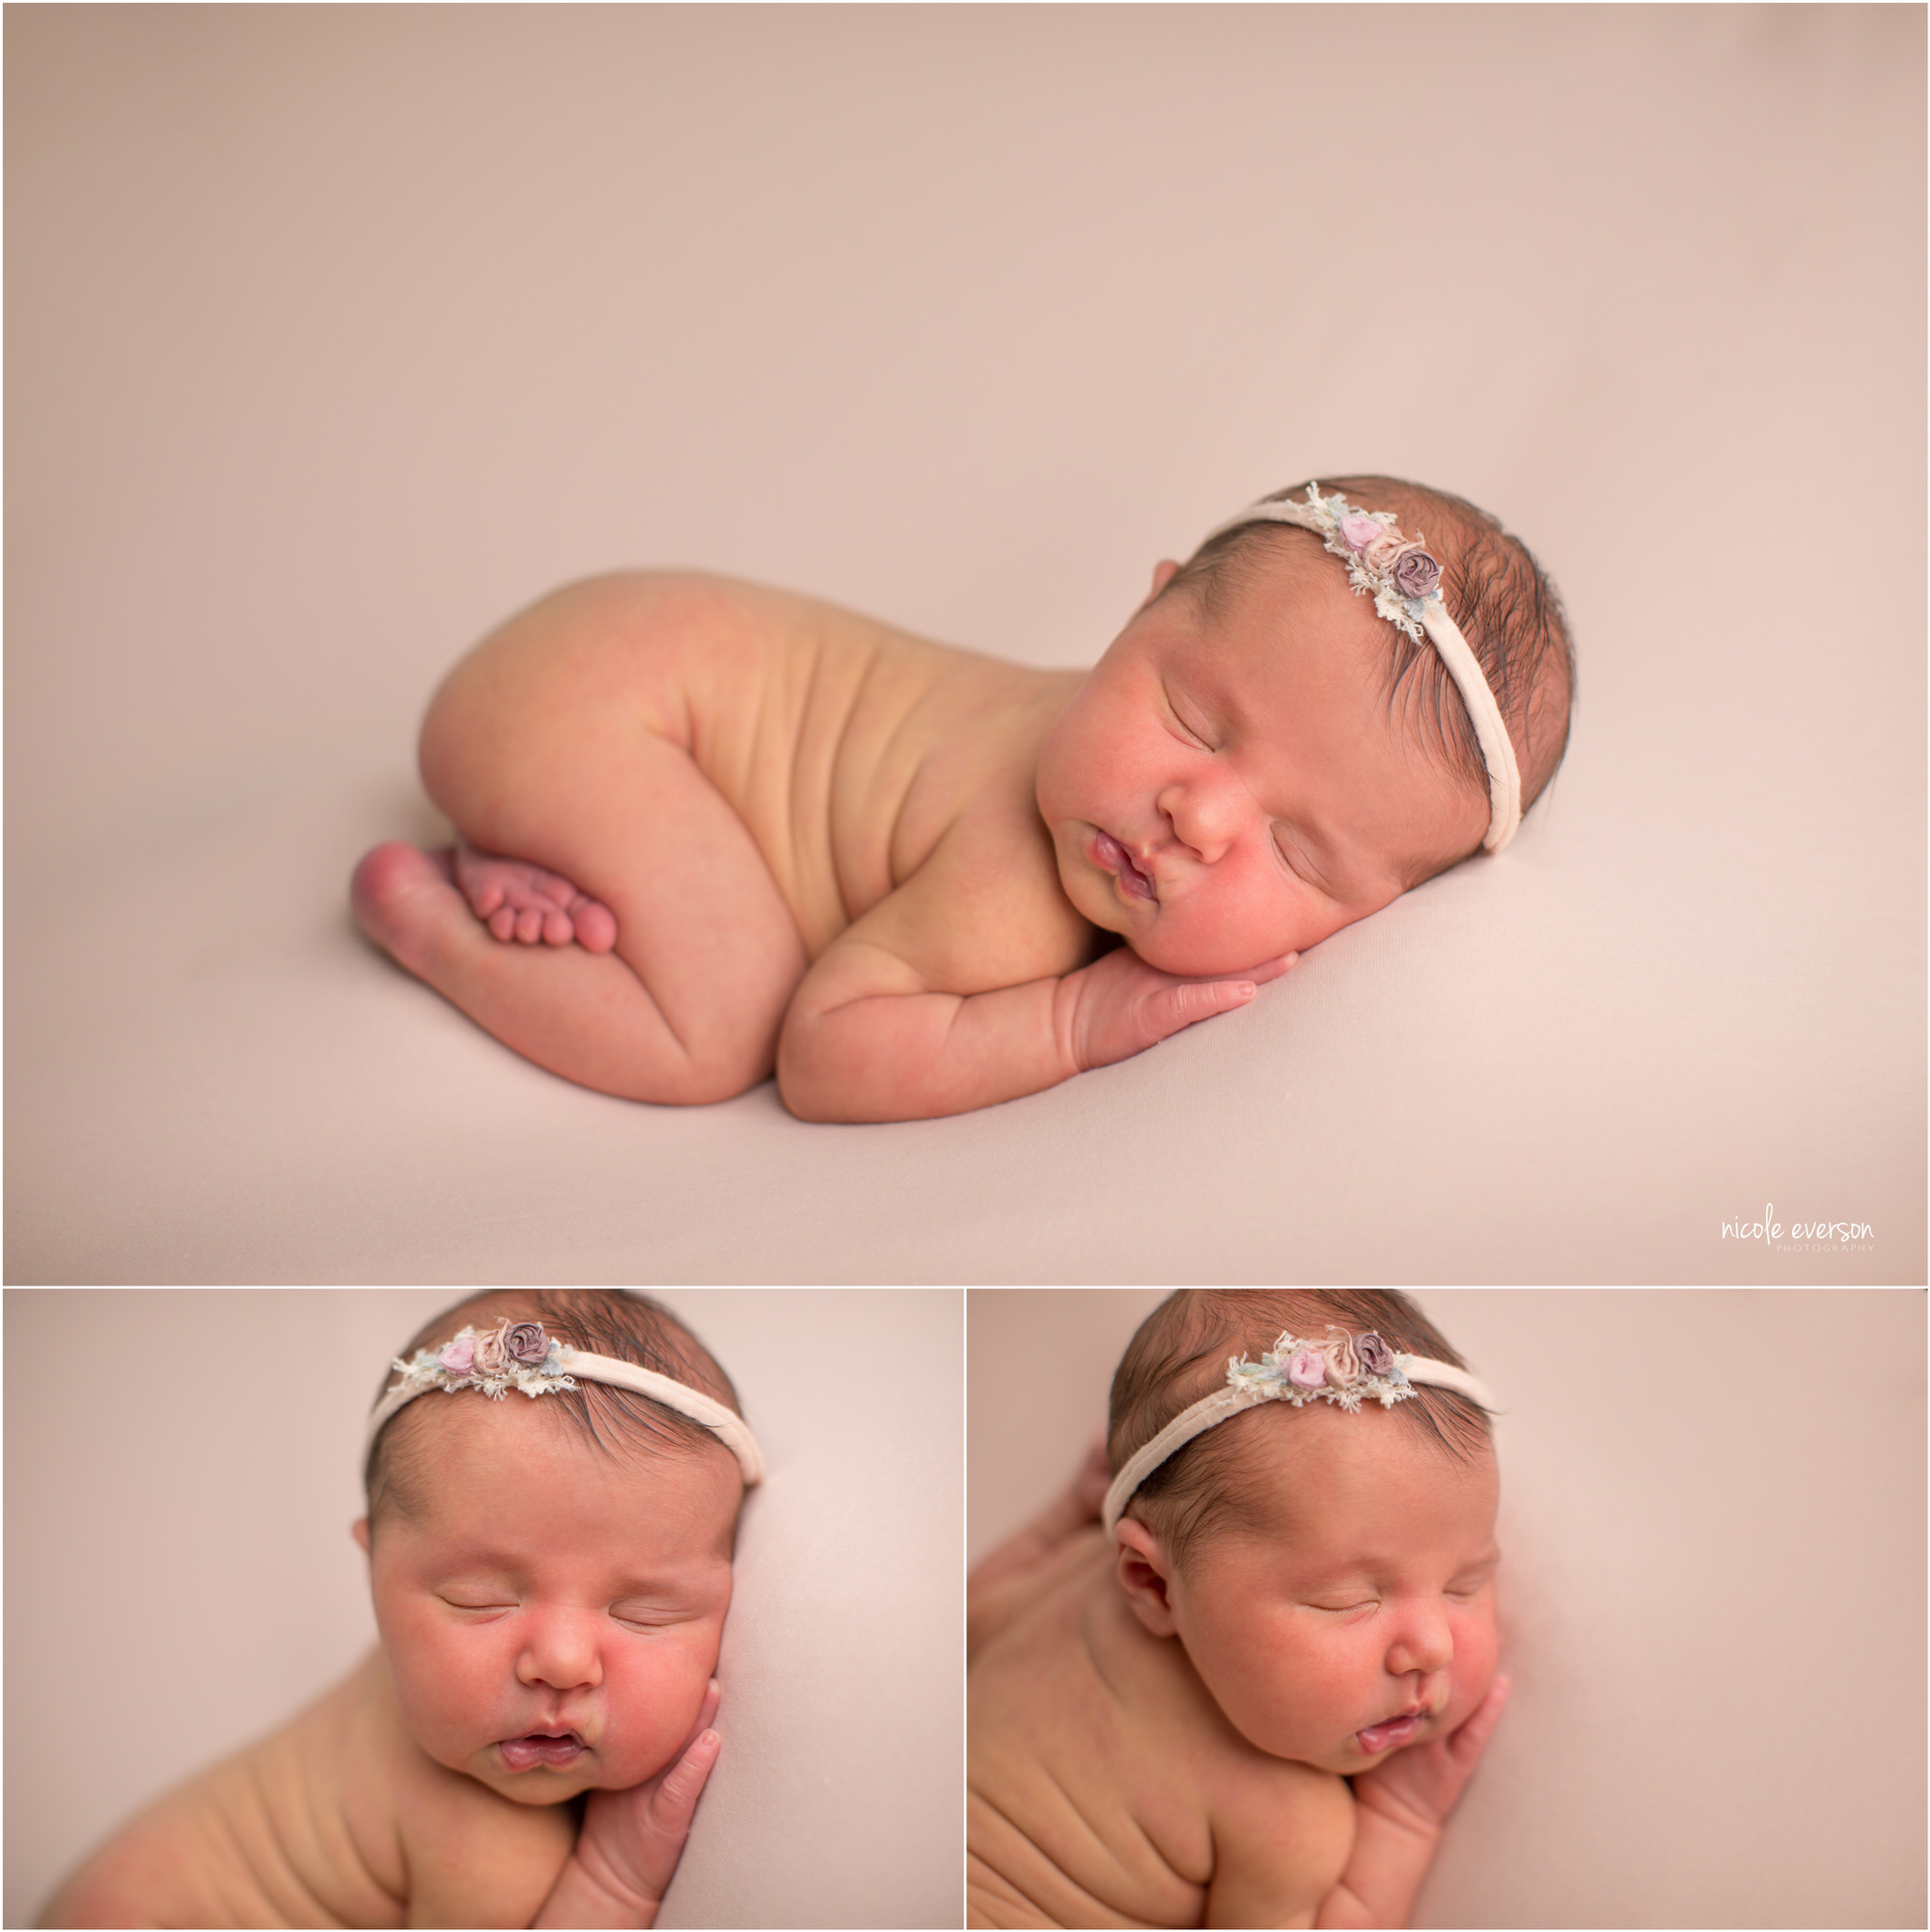 Infant Mini Session | Newborn Baby Girl Photo Session in Charlotte, NC